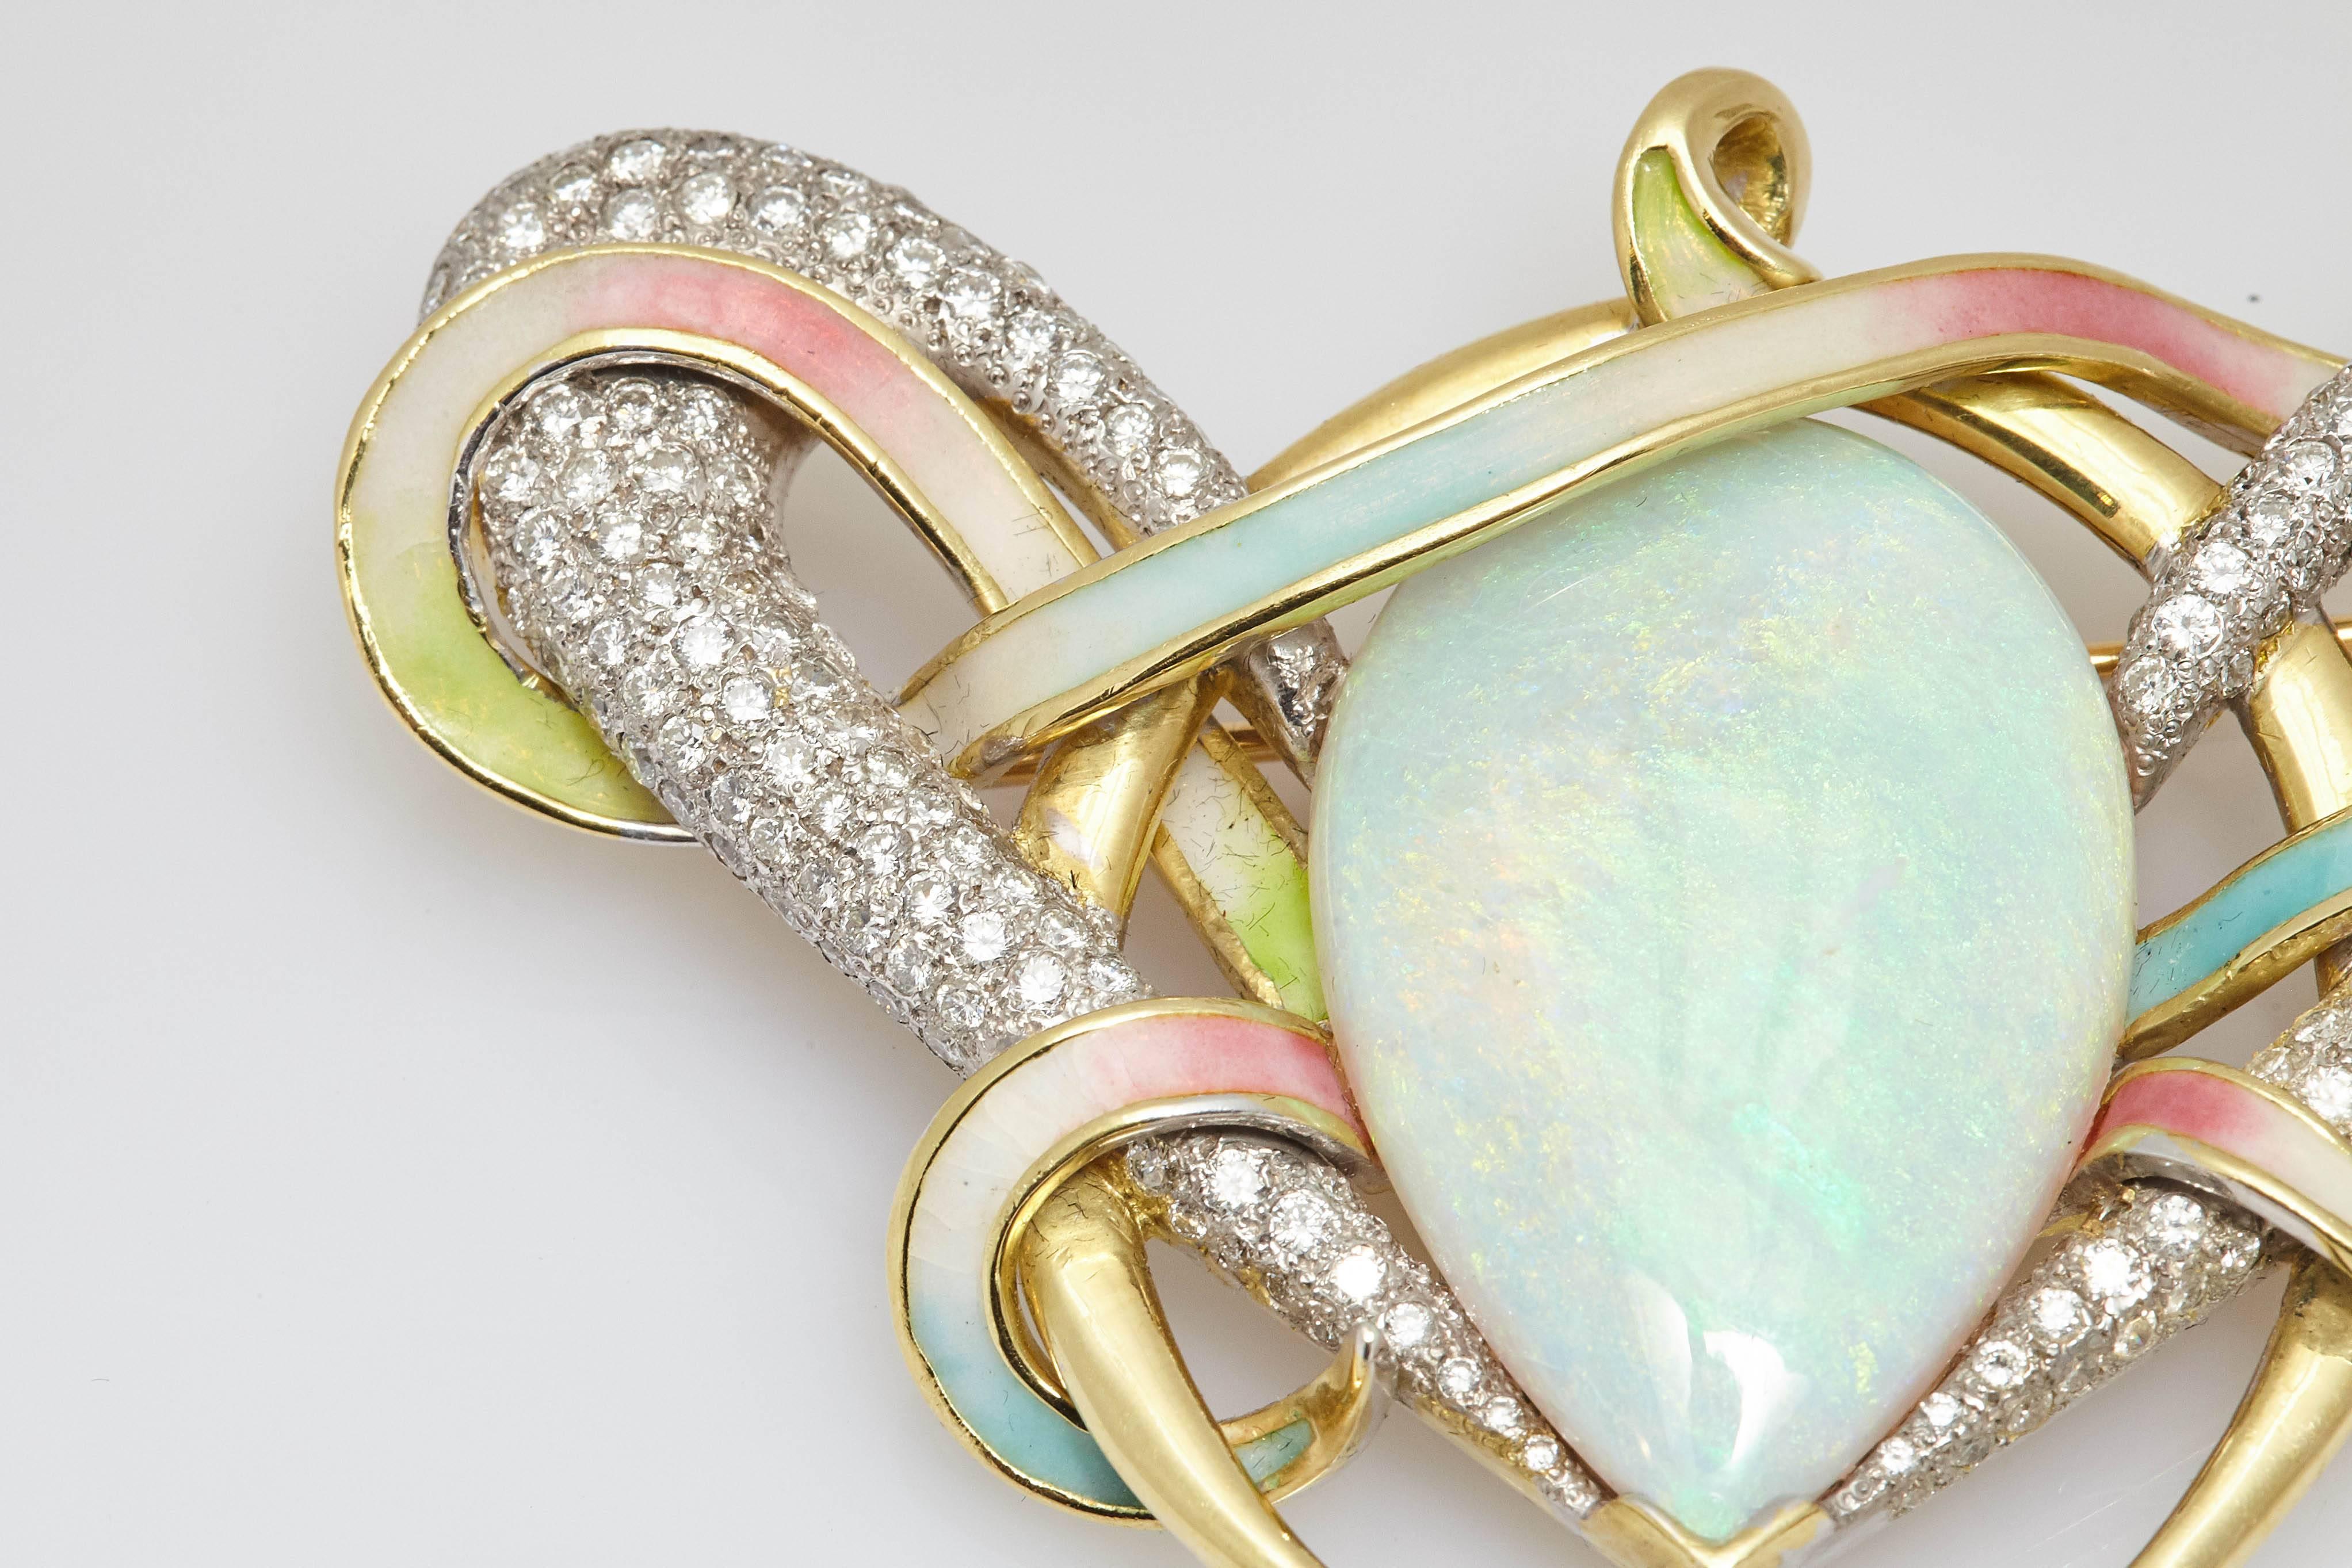 An unusual brooch centering a large pear shaped opal, in a mounting of planetary inspiration with round cut diamonds and multicolor enamel, set on 18kt yellow gold. Made in the United States, circa 1970s.